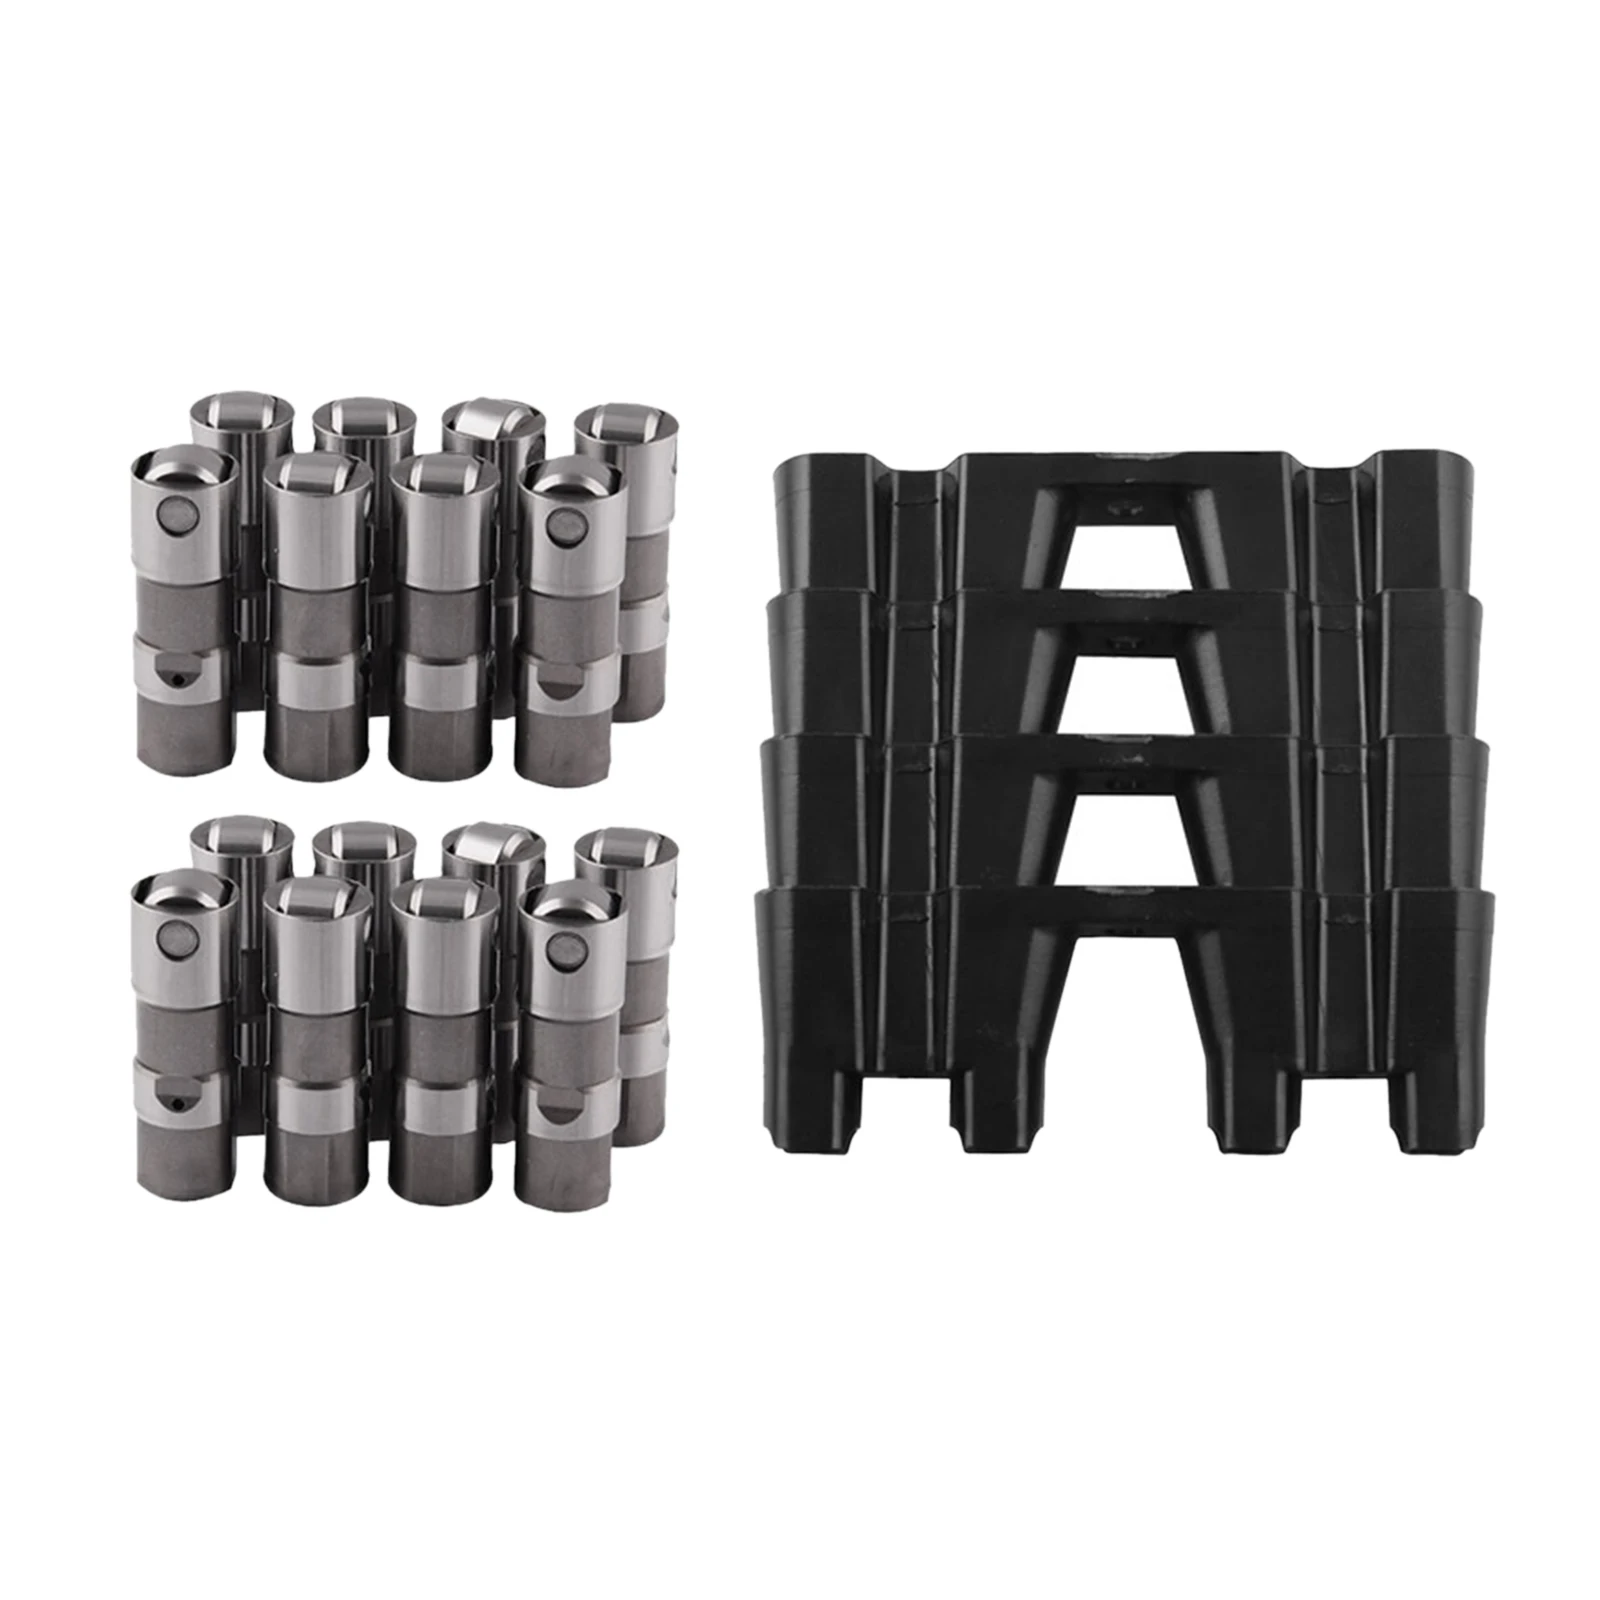 16x Upgraded Hydraulic Roller Lifters Kit Part No. 12499225 for GMC LS2 LS7 Series Engines